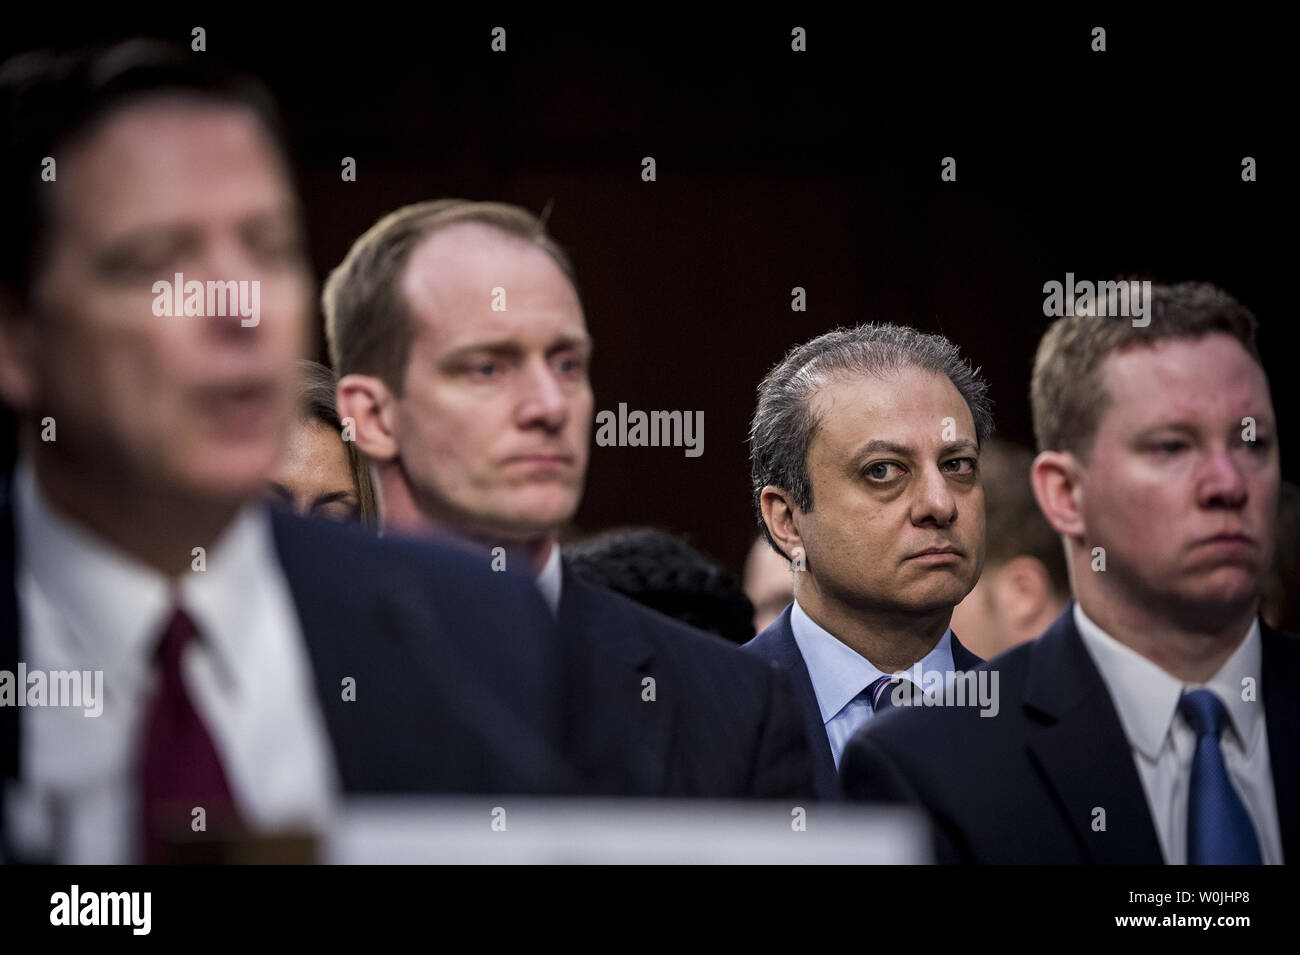 Preet Bharara, former U.S. Attorney for the Southern District of New York looks on as former FBI Director James Comey testifies at a hearing of the Senate Select Intelligence Committee on Capitol Hill in Washington, D.C. on June 8, 2017. Comey testified about his interactions with President Donald Trump that included the alleged pressure Comey felt to stop certain investigations regarding Russia and its interference in the presidential election.  Comey was abruptly fired by the president last month.  Photo by Pete Marovich/UPI Stock Photo